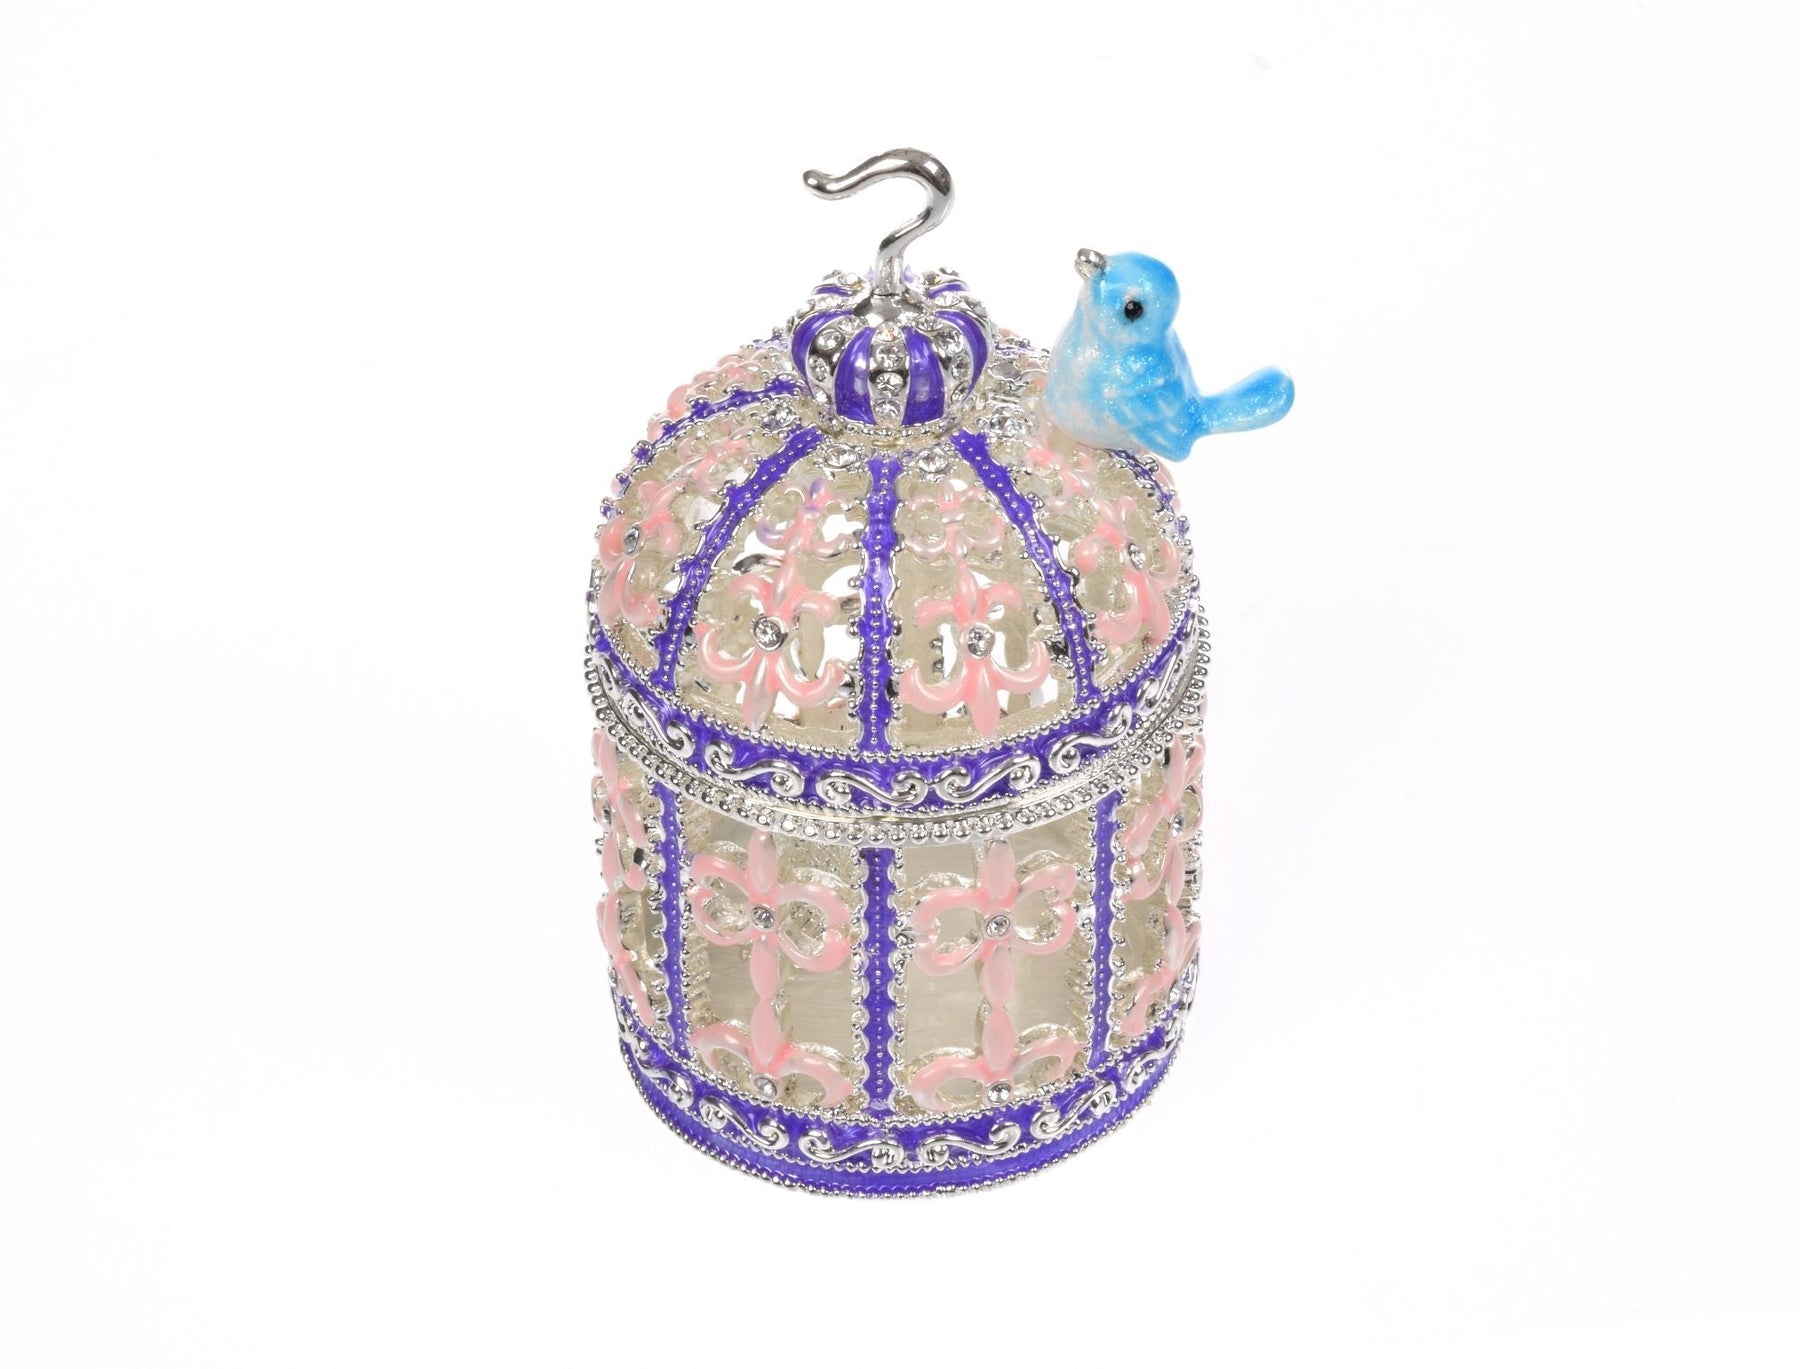 Light Blue Bird on top top of a purple birdcage Faberge Styled Trinket Box